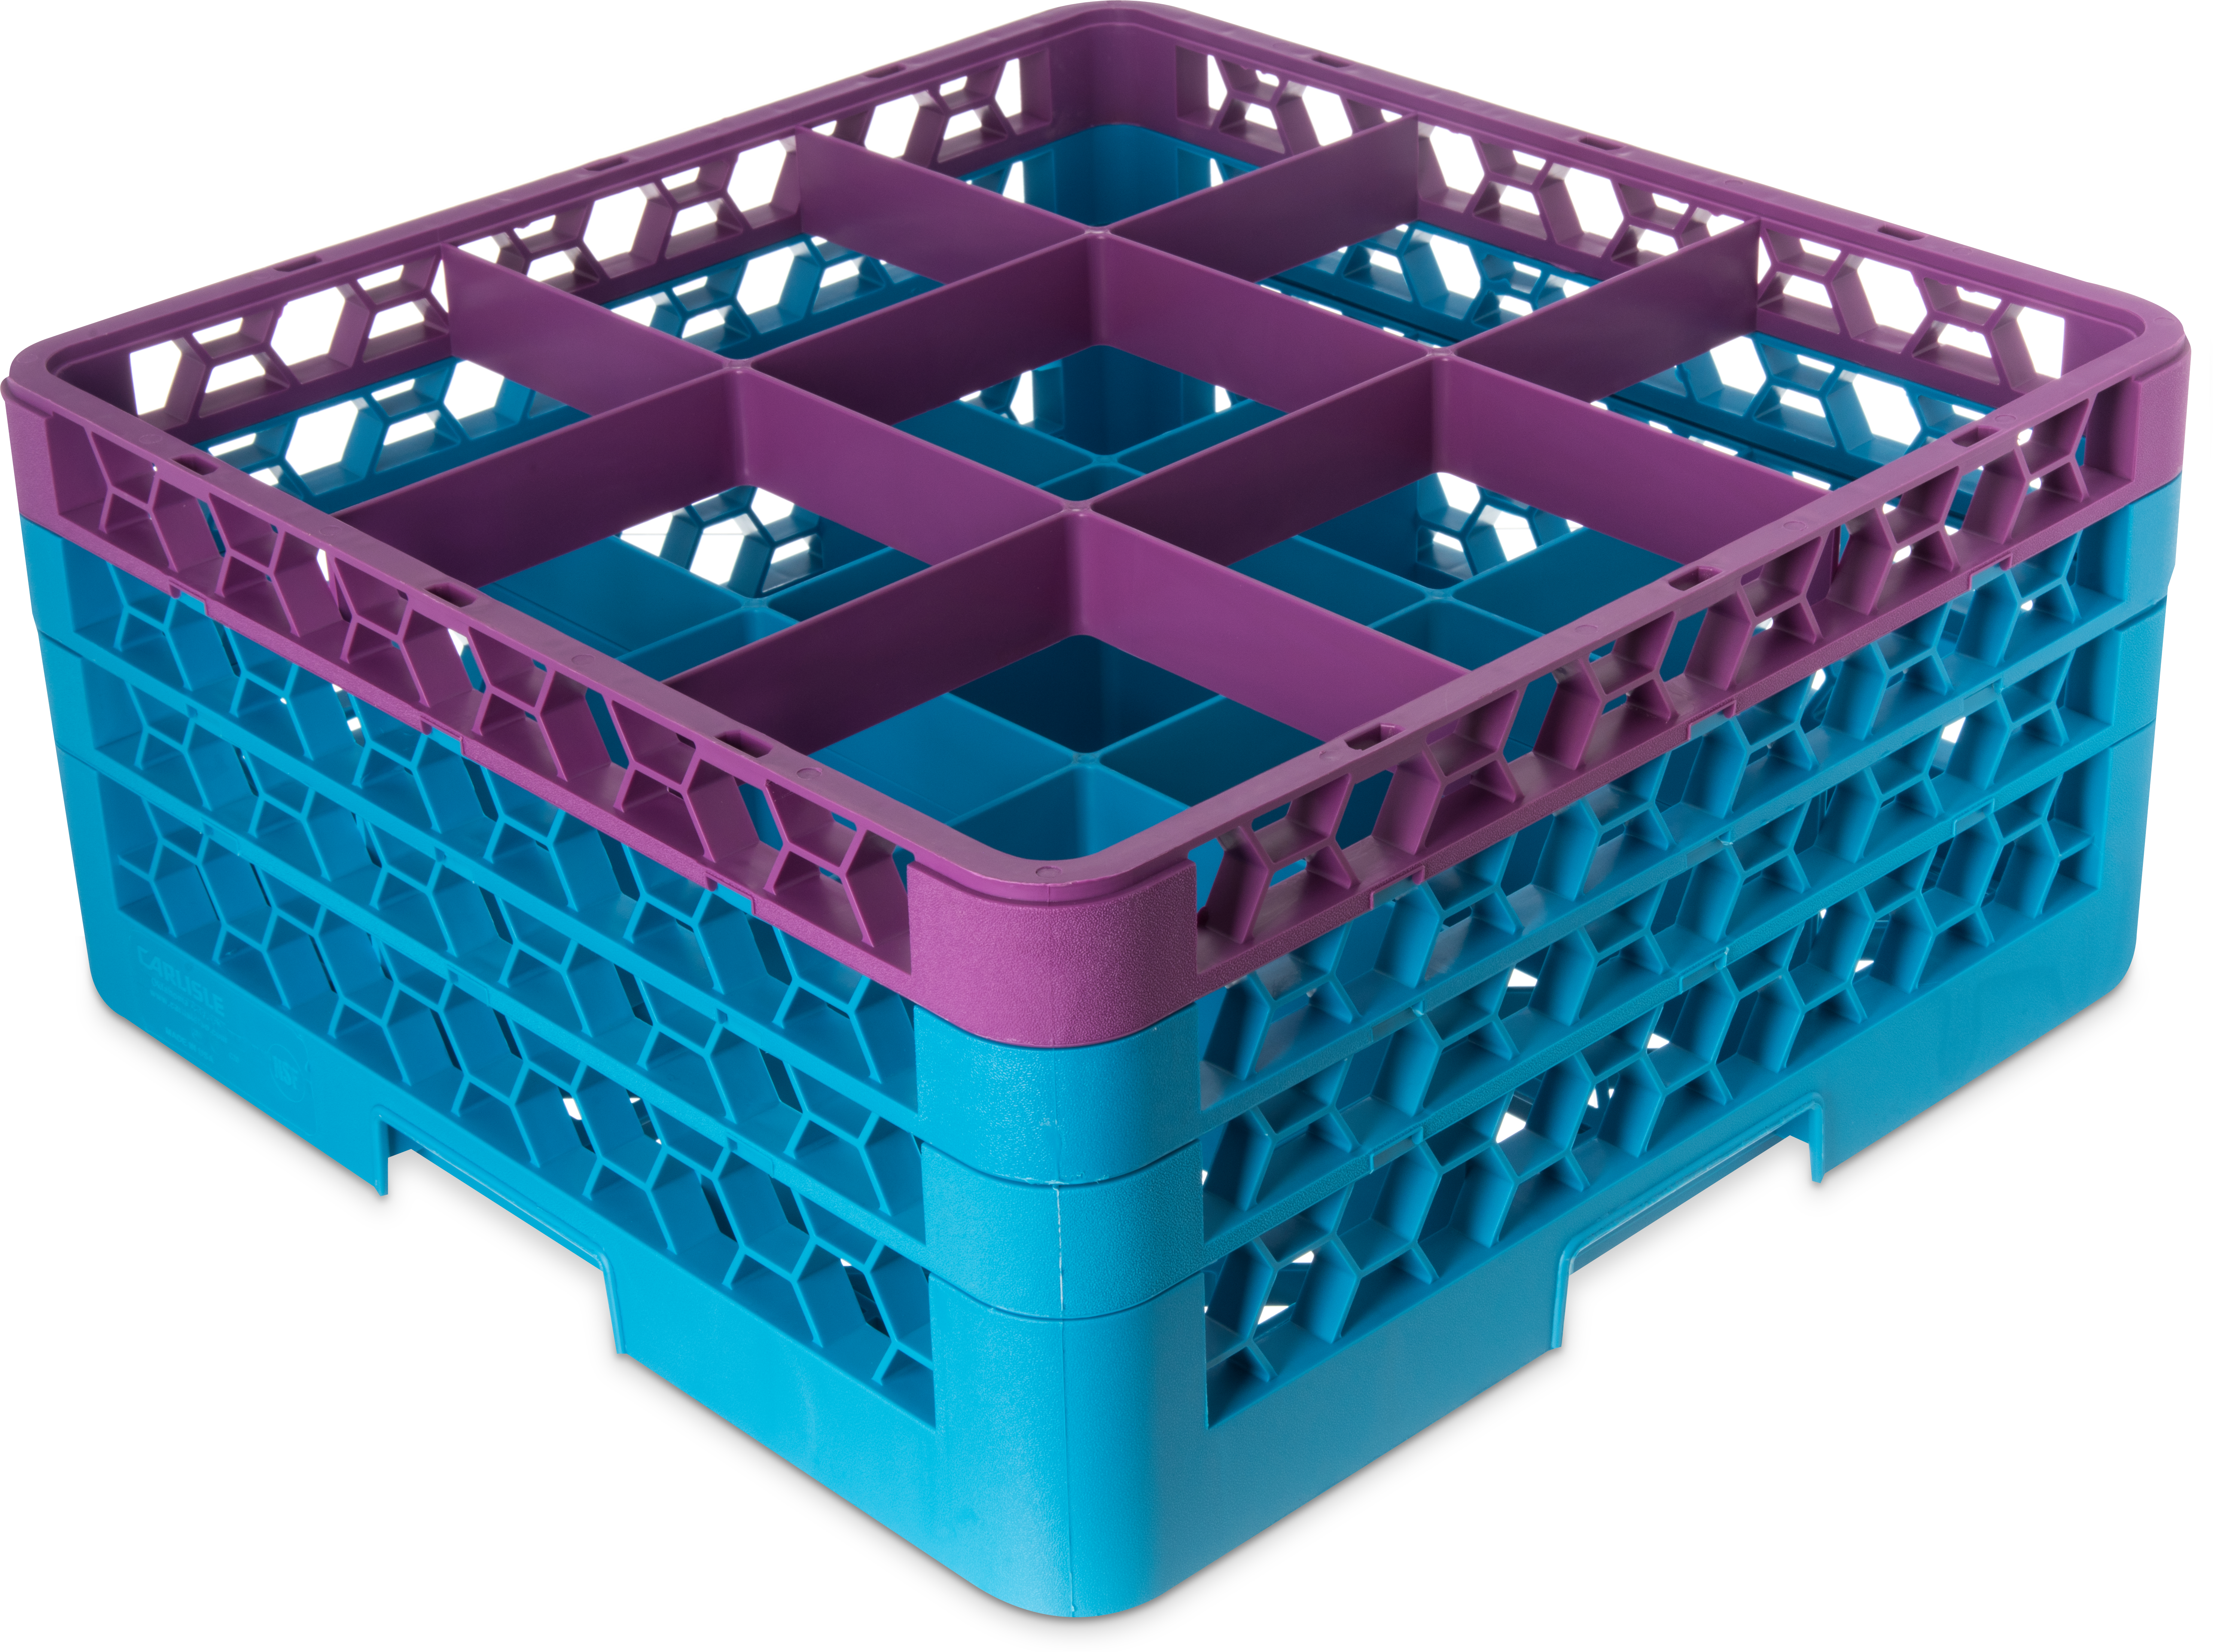 OptiClean 9 Compartment Glass Rack with 3 Extenders 8.72 - Lavender-Carlisle Blue